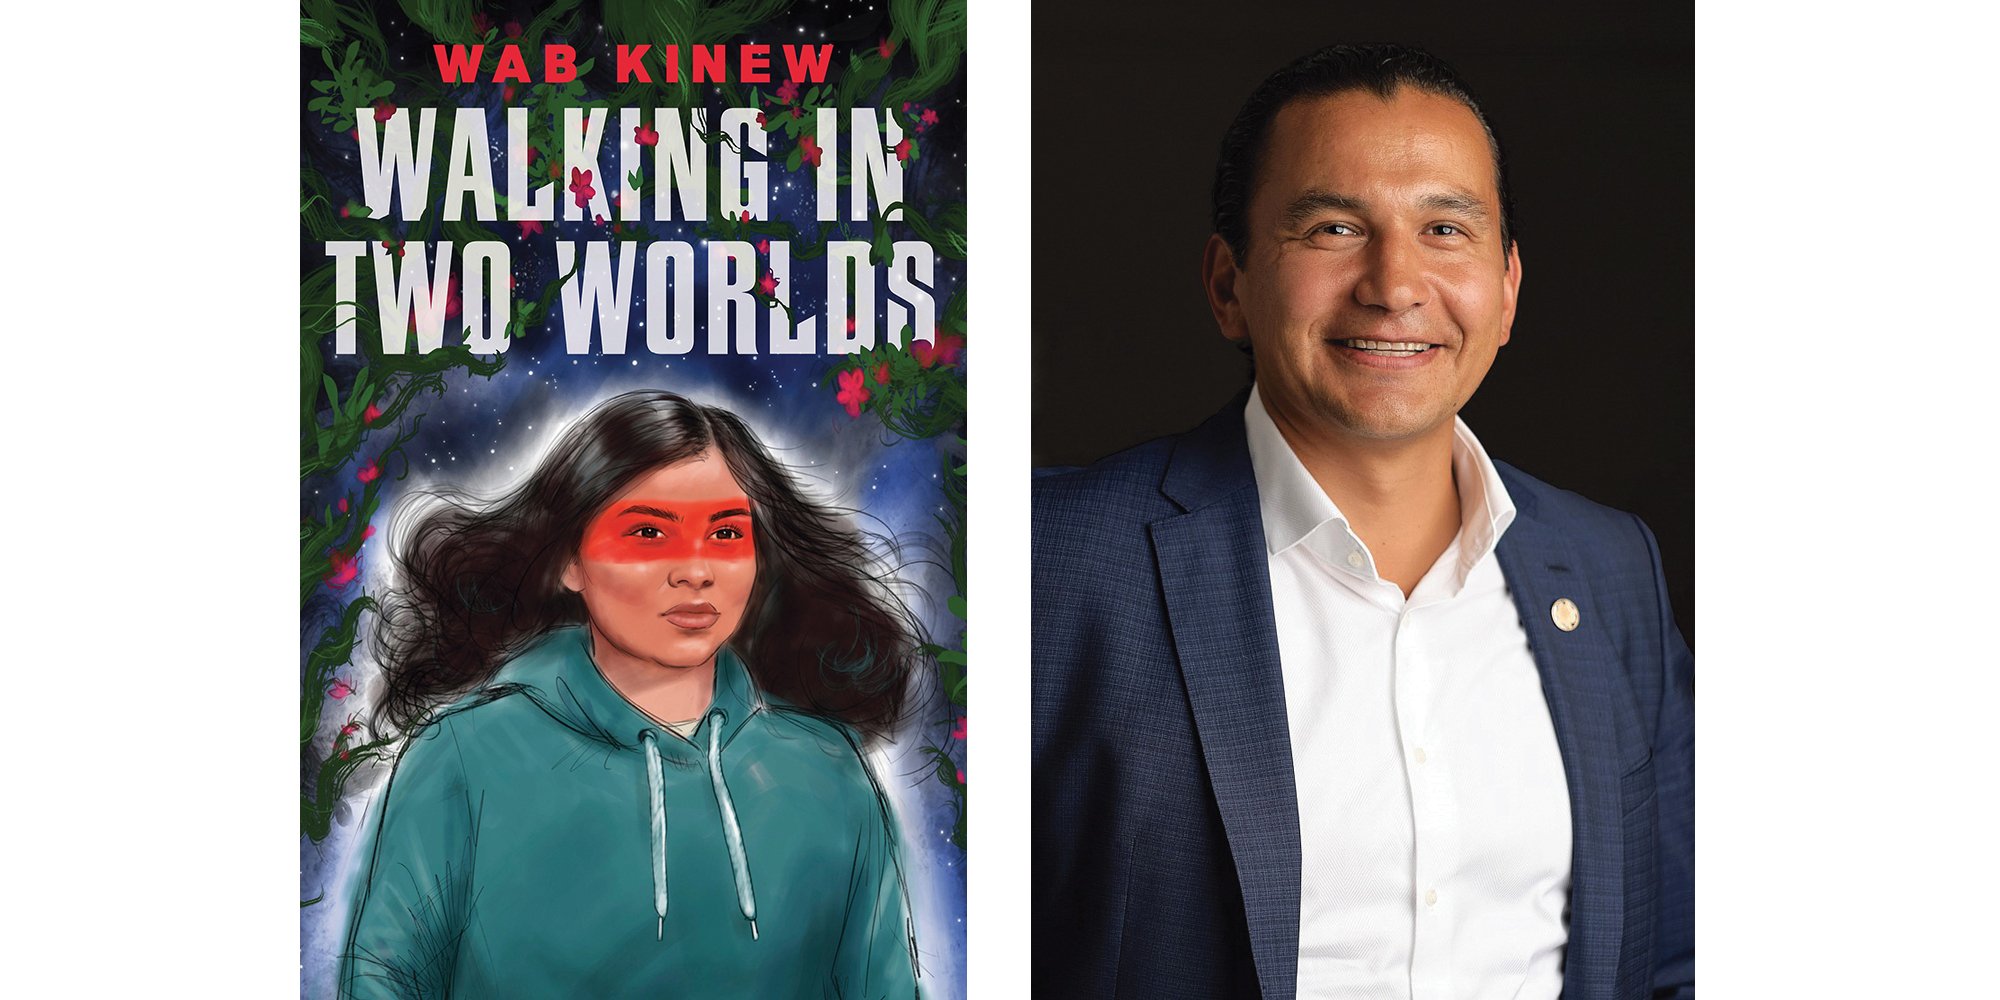 The cover of Wab Kinew's Walking in Two Worlds with a photo of the author